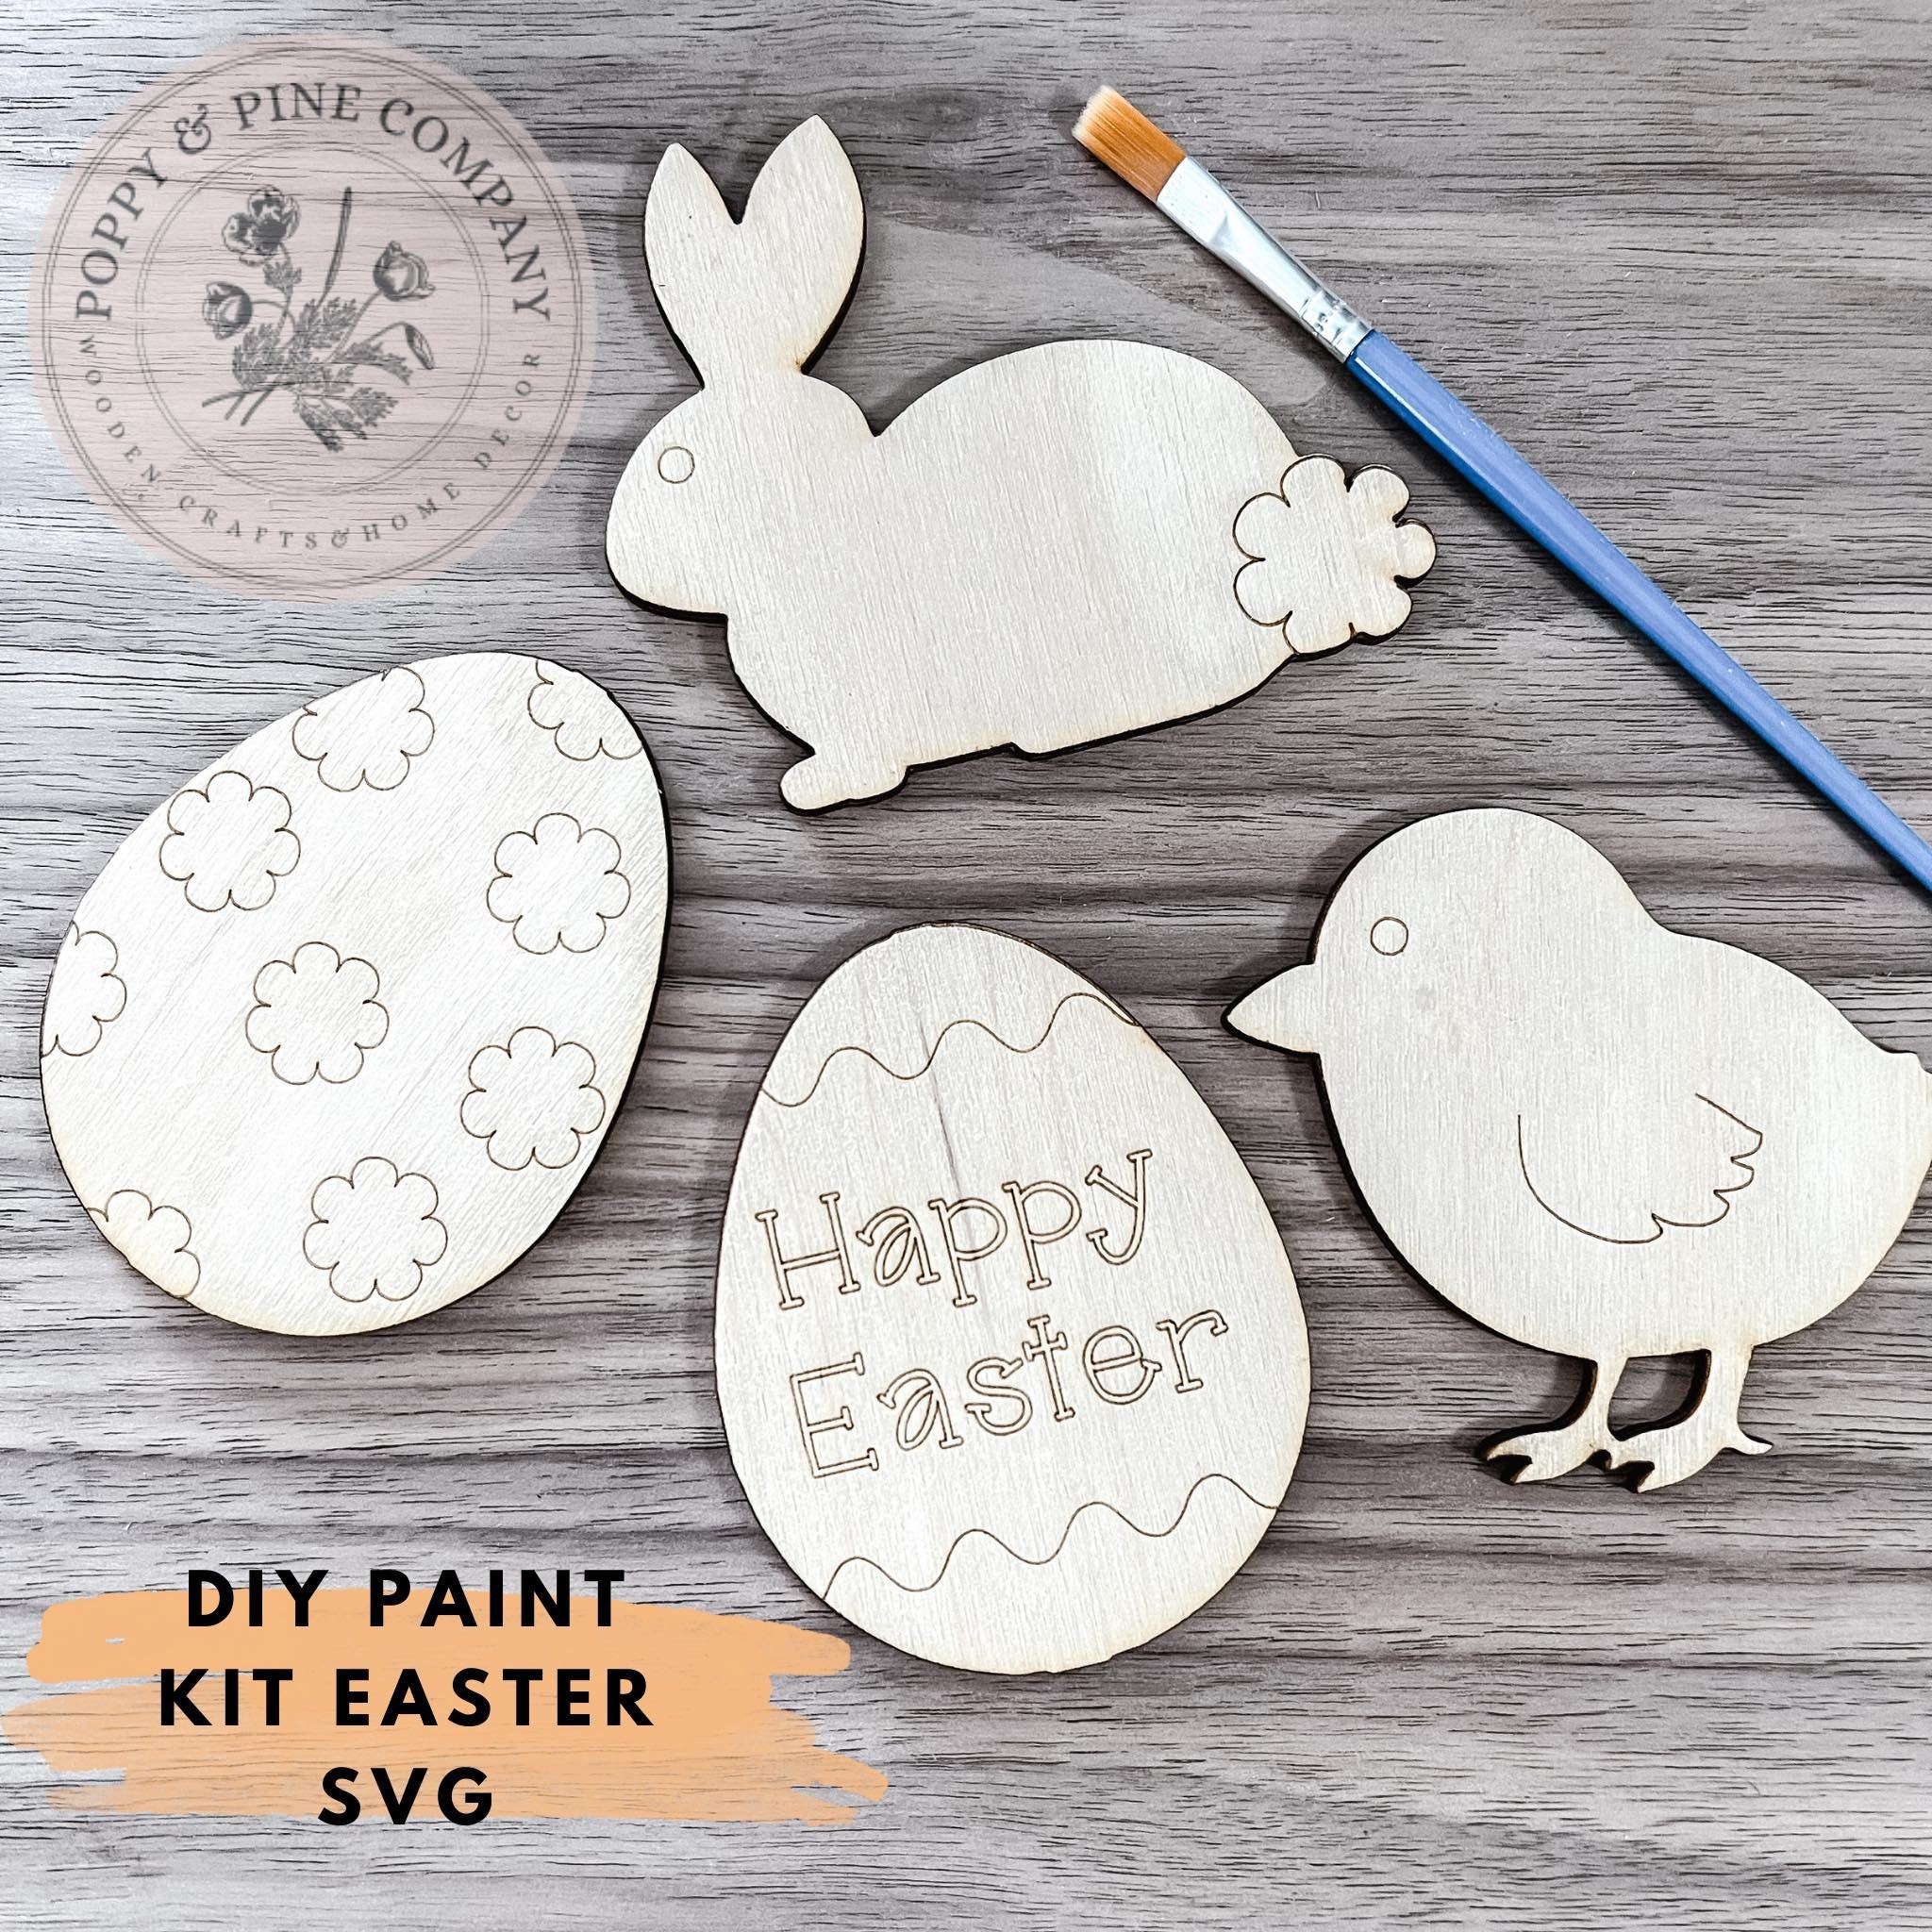 Easter Card Making Kit for Adults, DIY Easter Cards, Easter Craft Kit, Make  Your Own Cards, Card Making Supplies, Cardmaking Kit, Easy DIY 